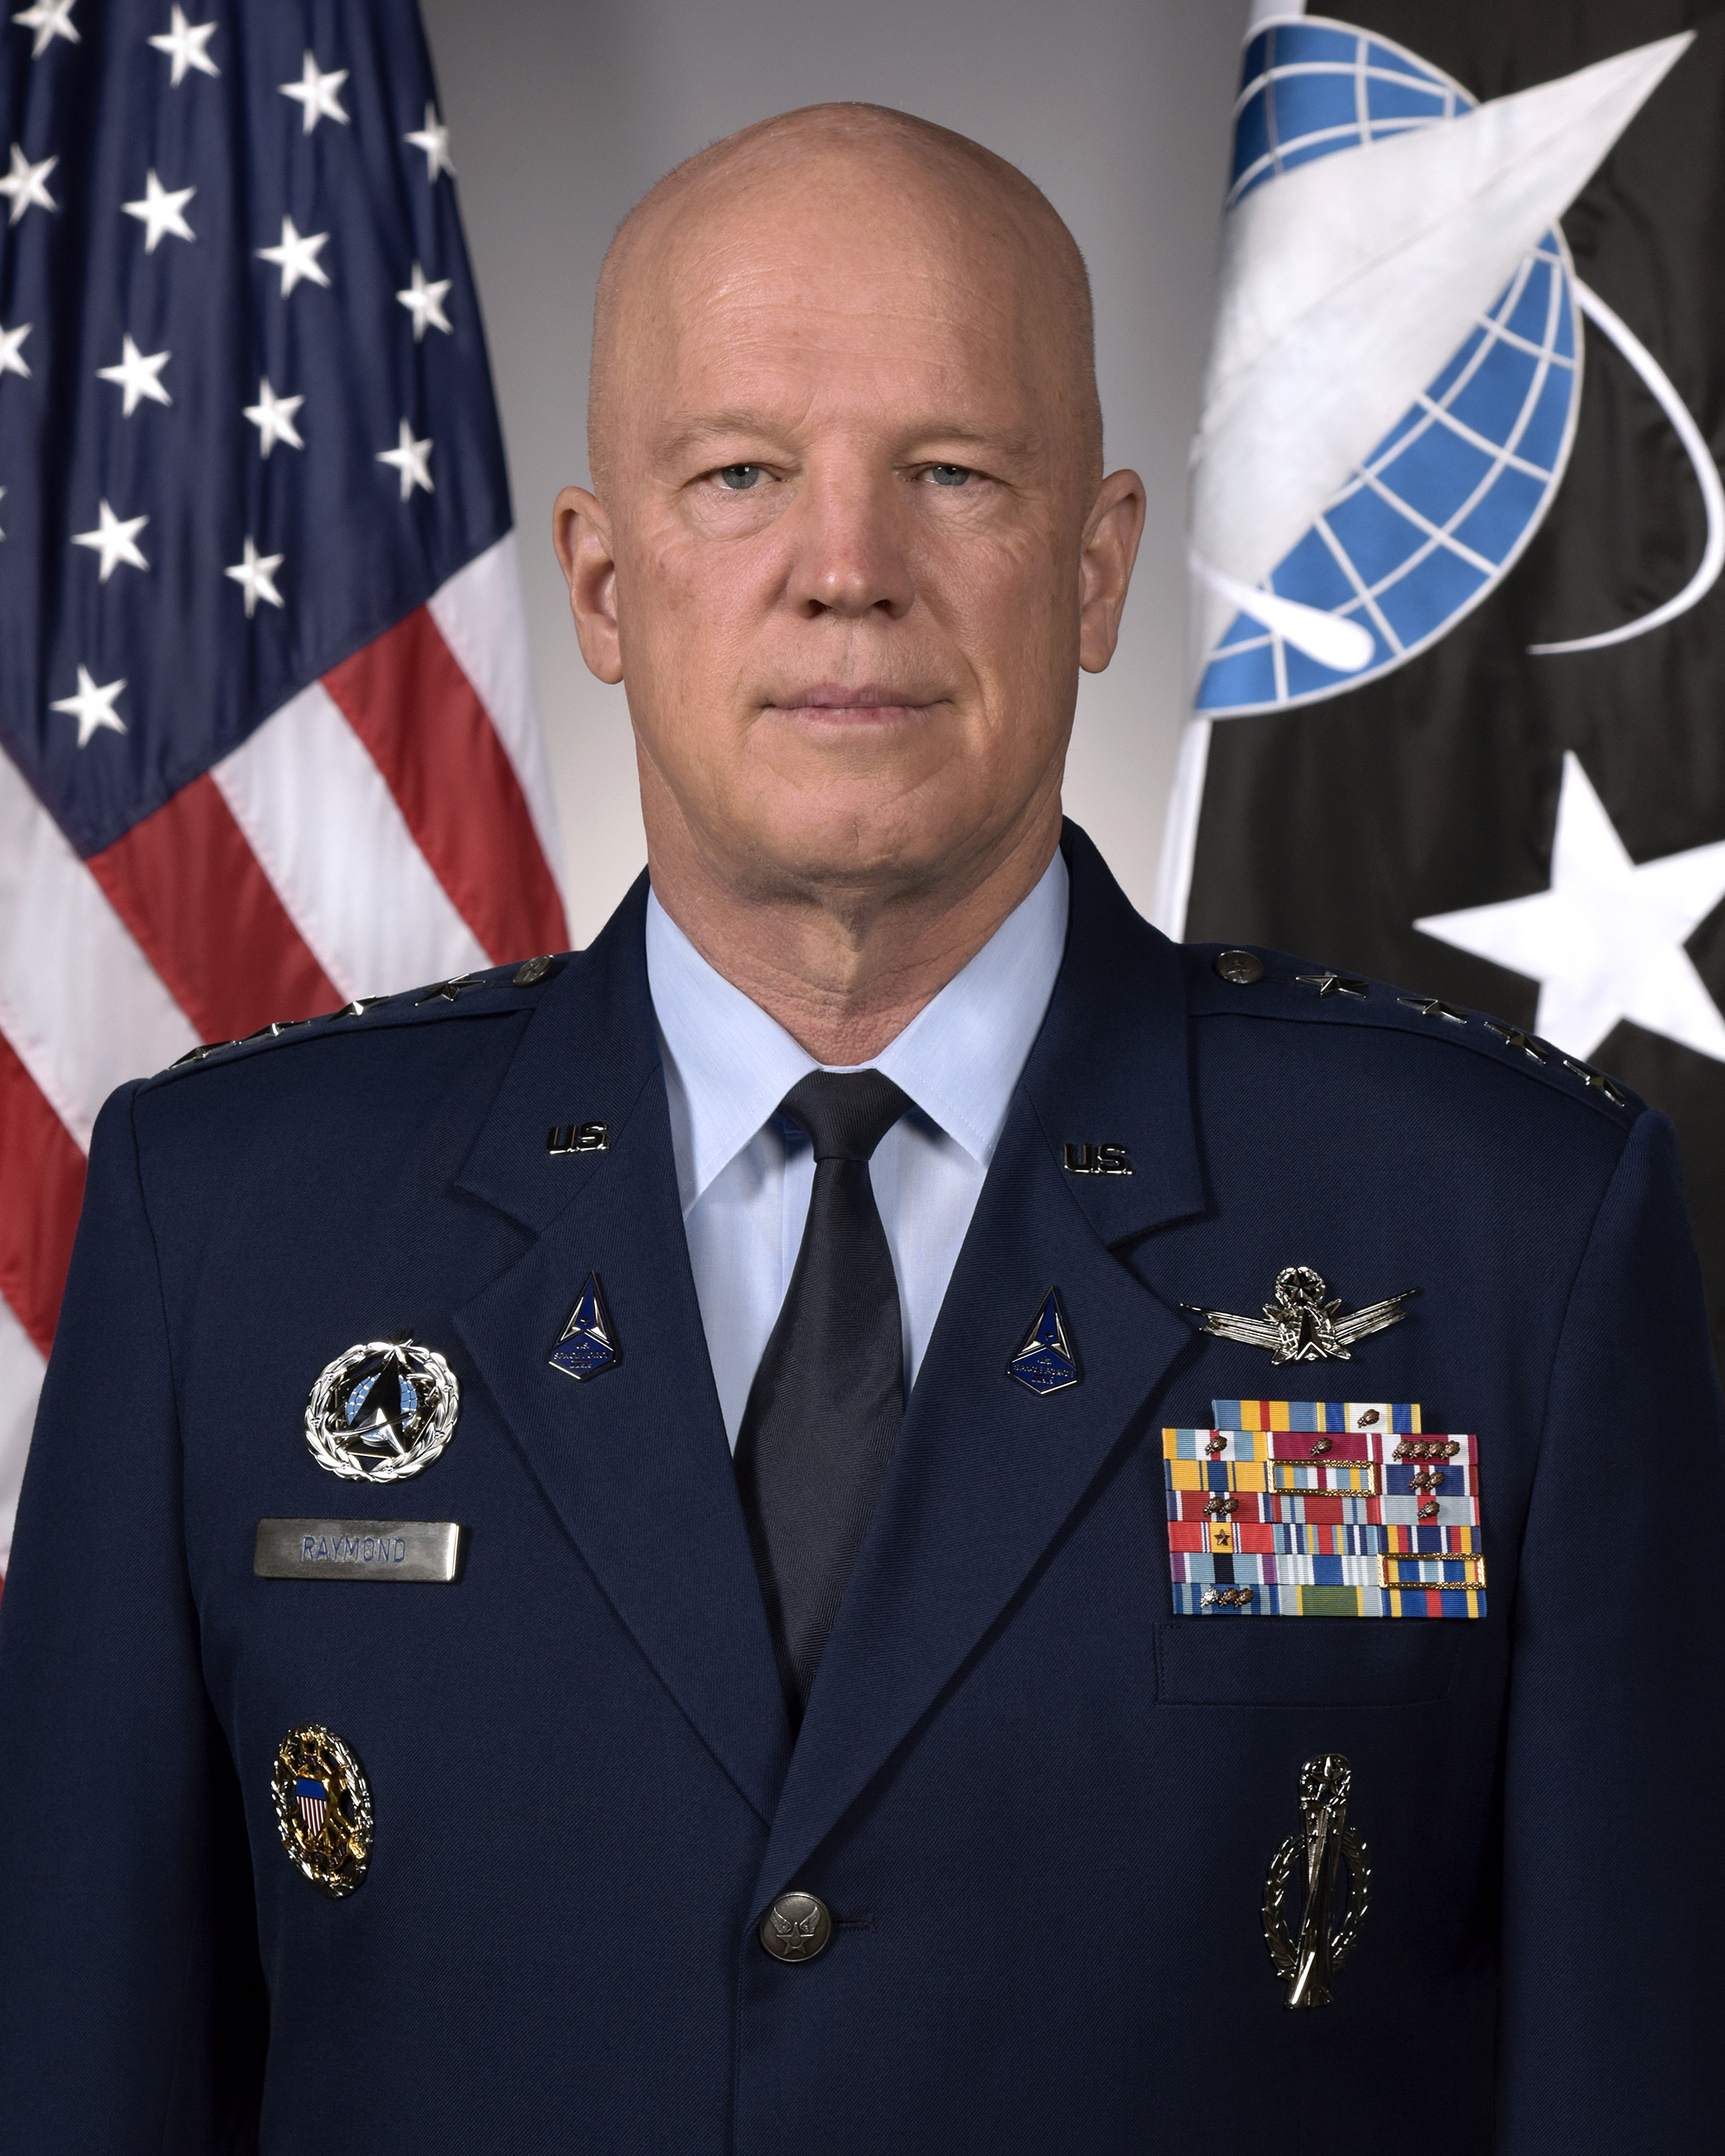 John W Jay Raymond United States Space Force Biographies